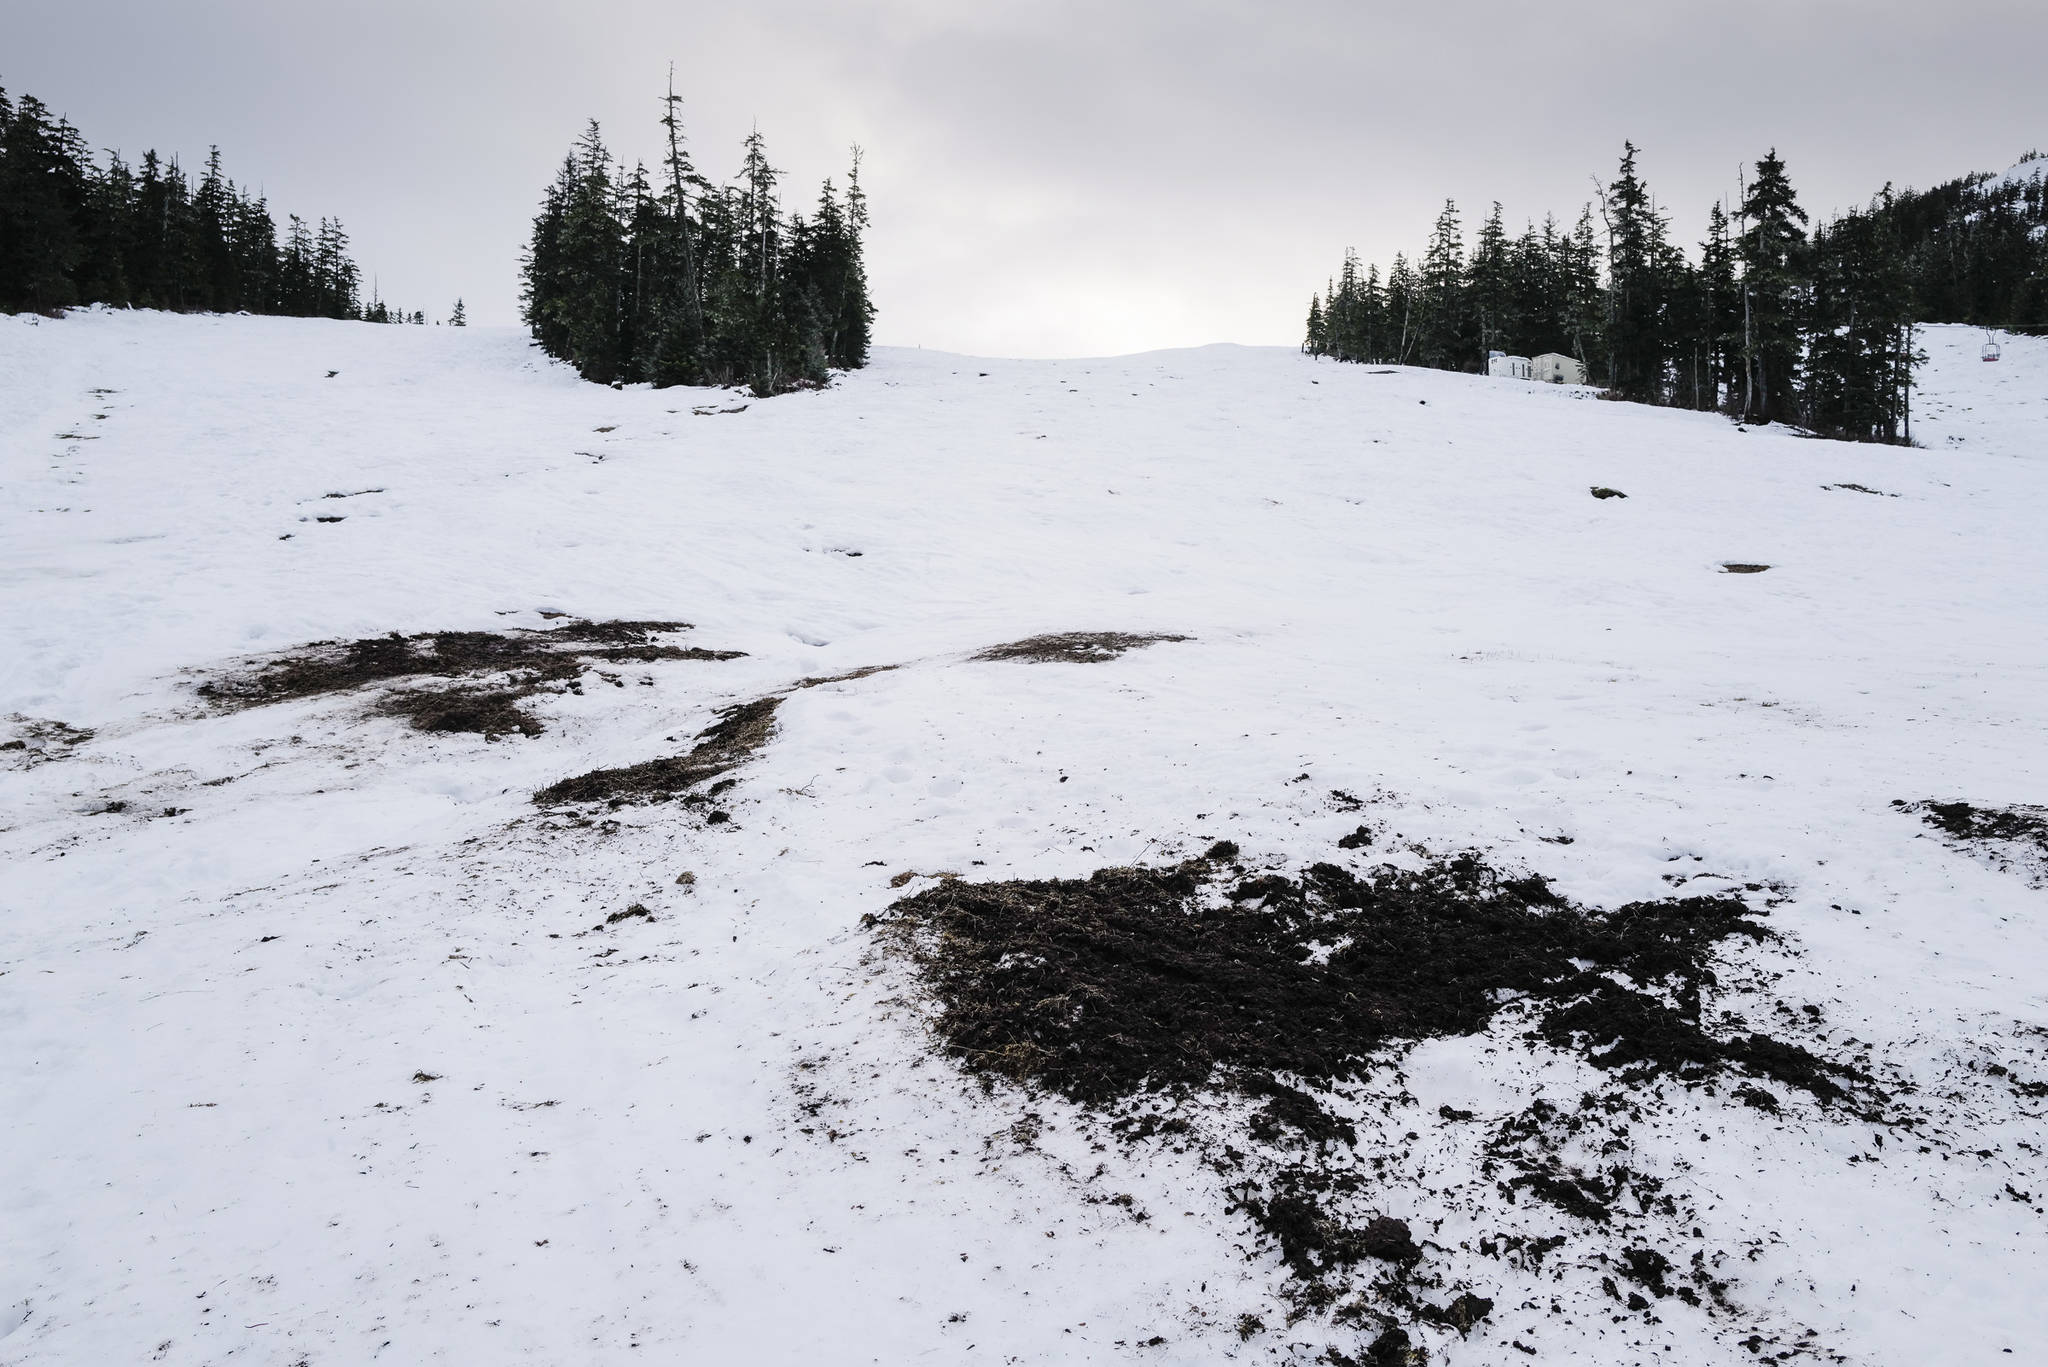 Warmer weather and rain have left bare spots on the lower slopes at Eaglecrest Ski Area on Thursday, Dec. 12, 2019. (Michael Penn | Juneau Empire)